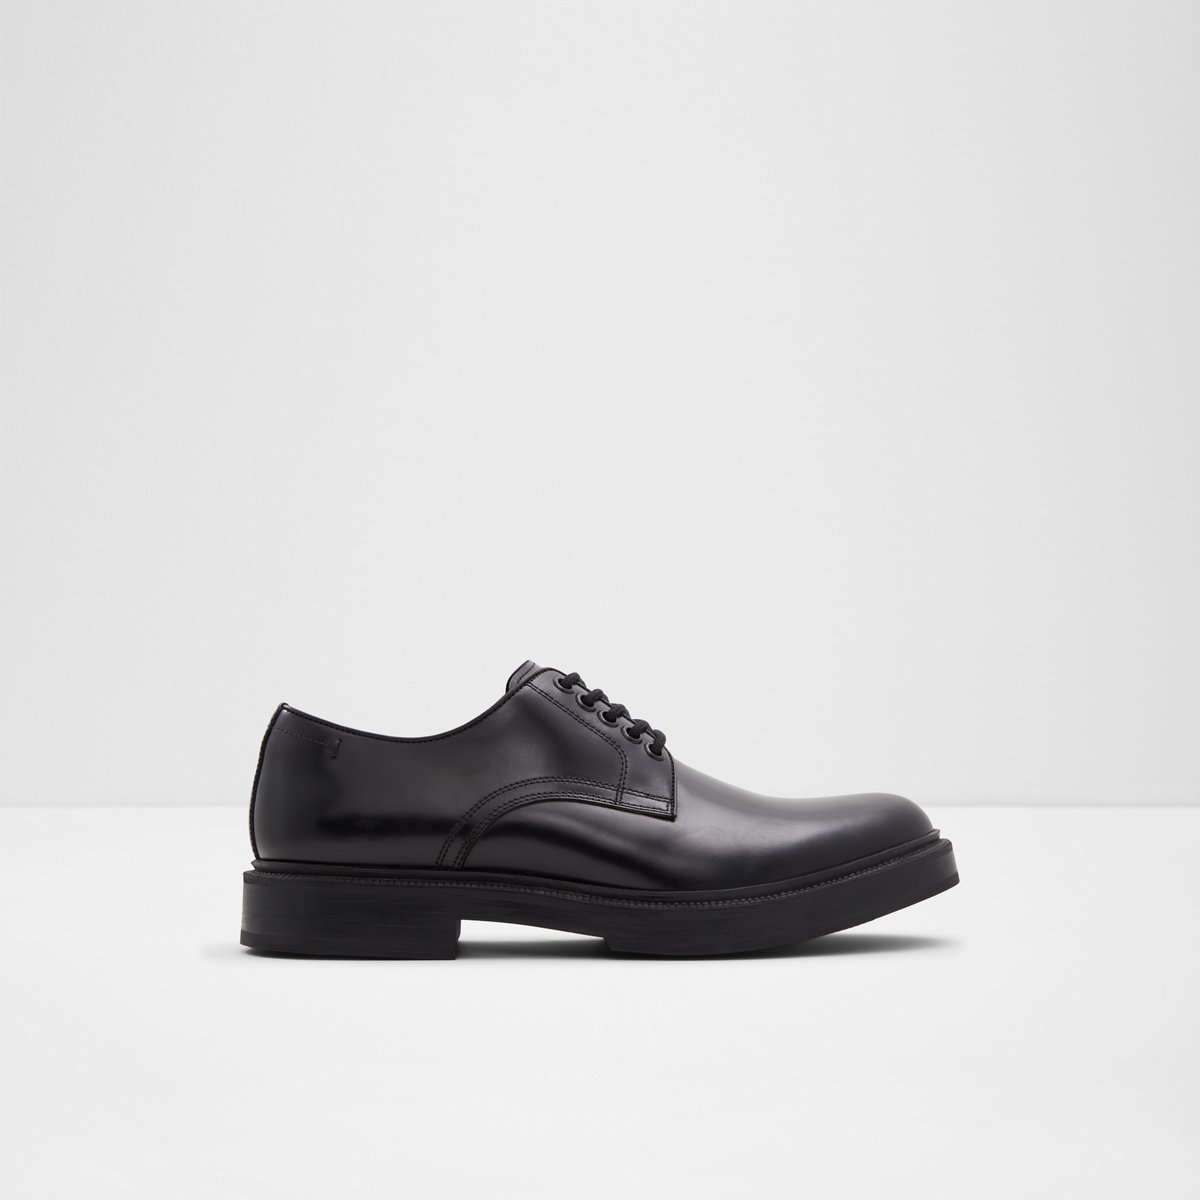 Etheraseth Oxford Shoes